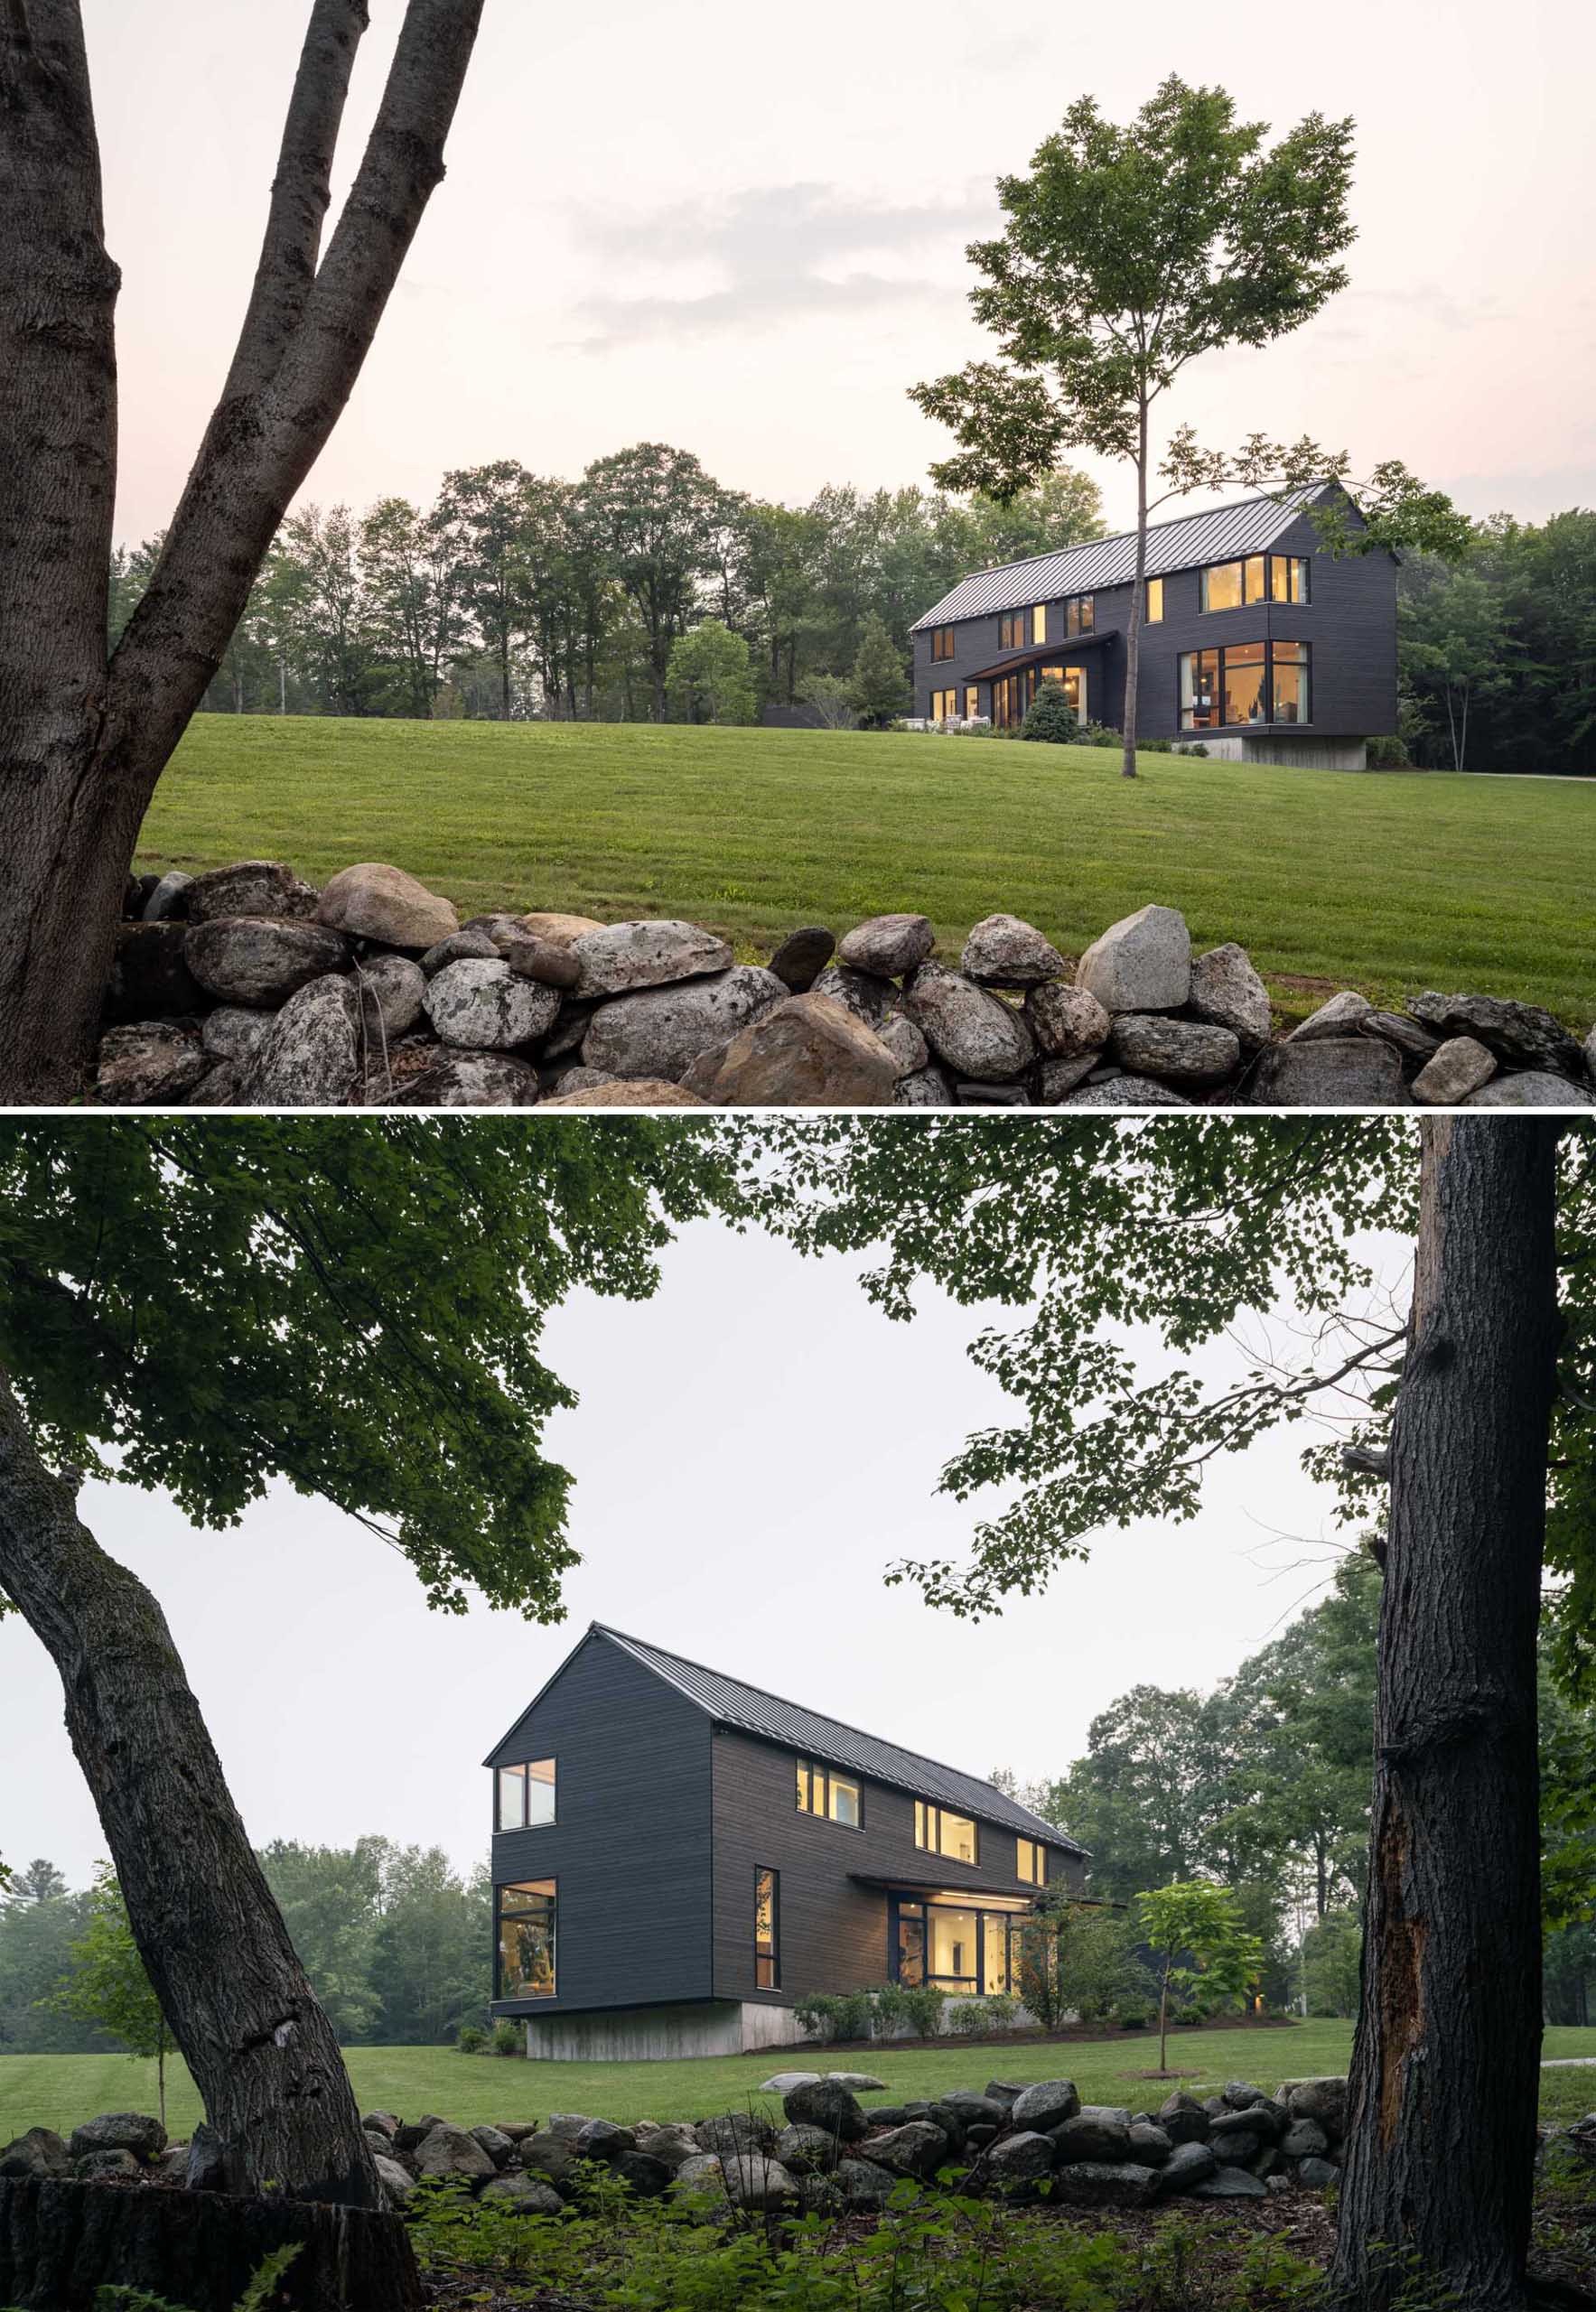 A modern house with a bold exterior clad with black stained wood siding and a standing seam metal roof.